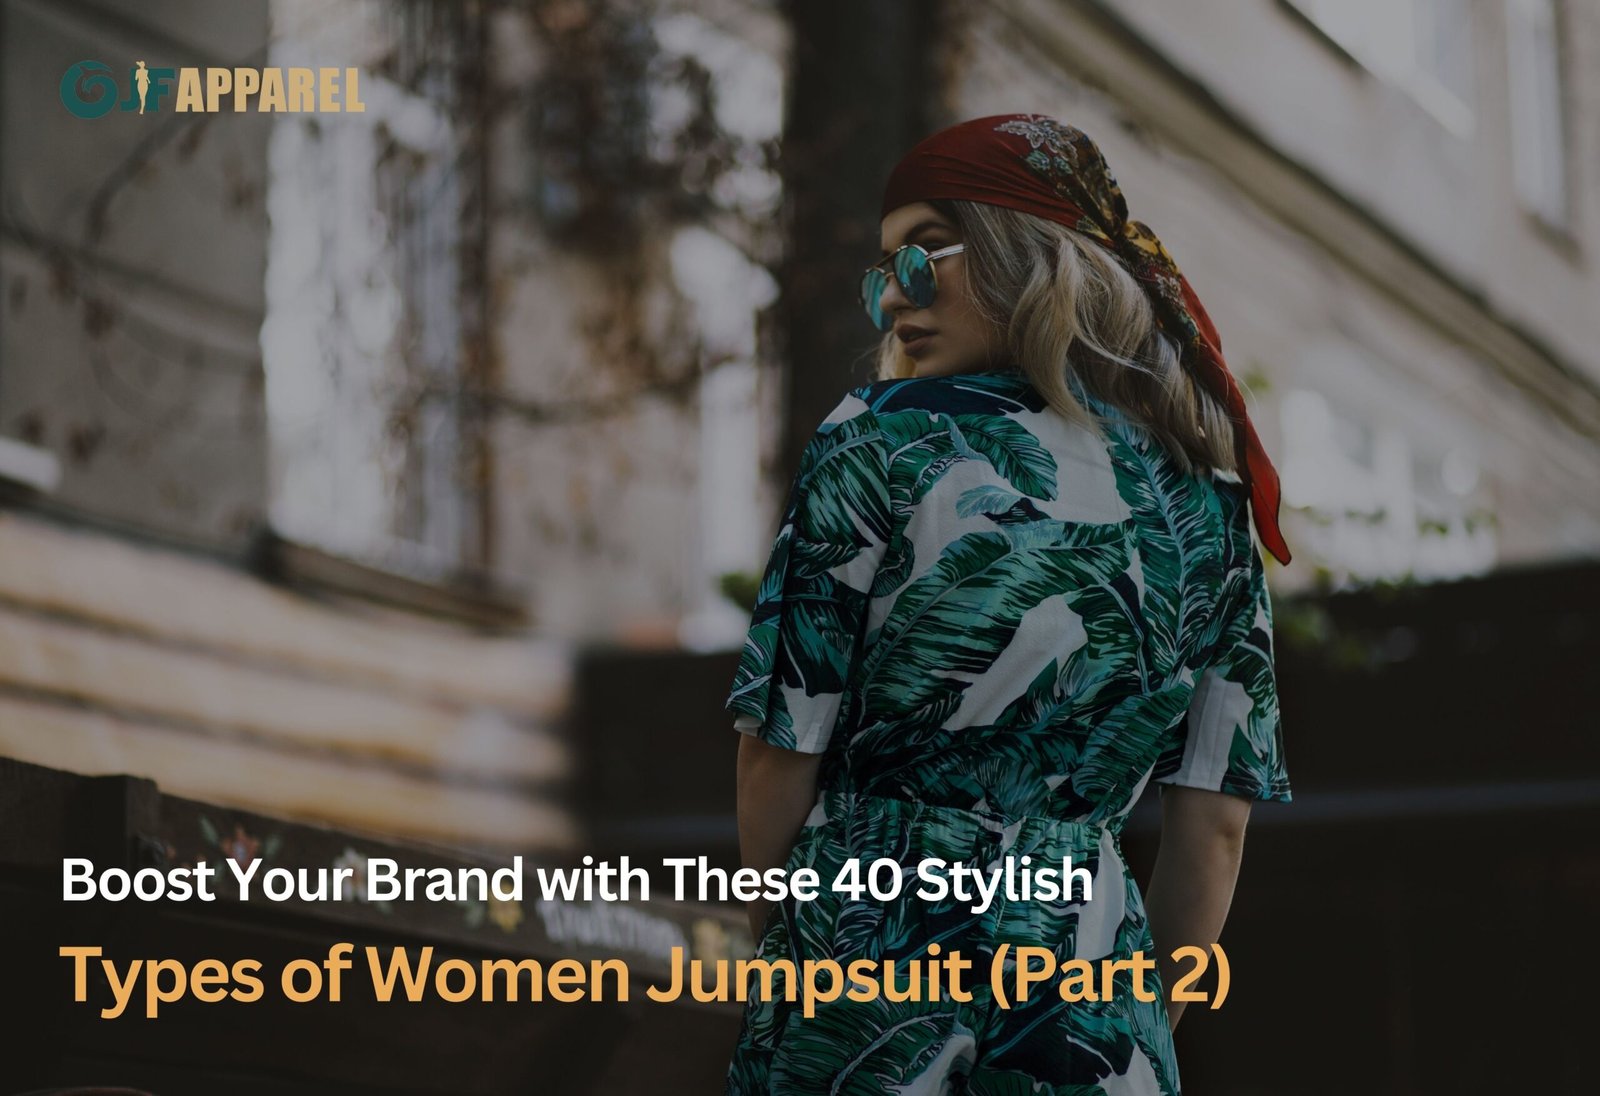 Boost Your Brand with These 40 Stylish Types of Women Jumpsuit (Part 2)